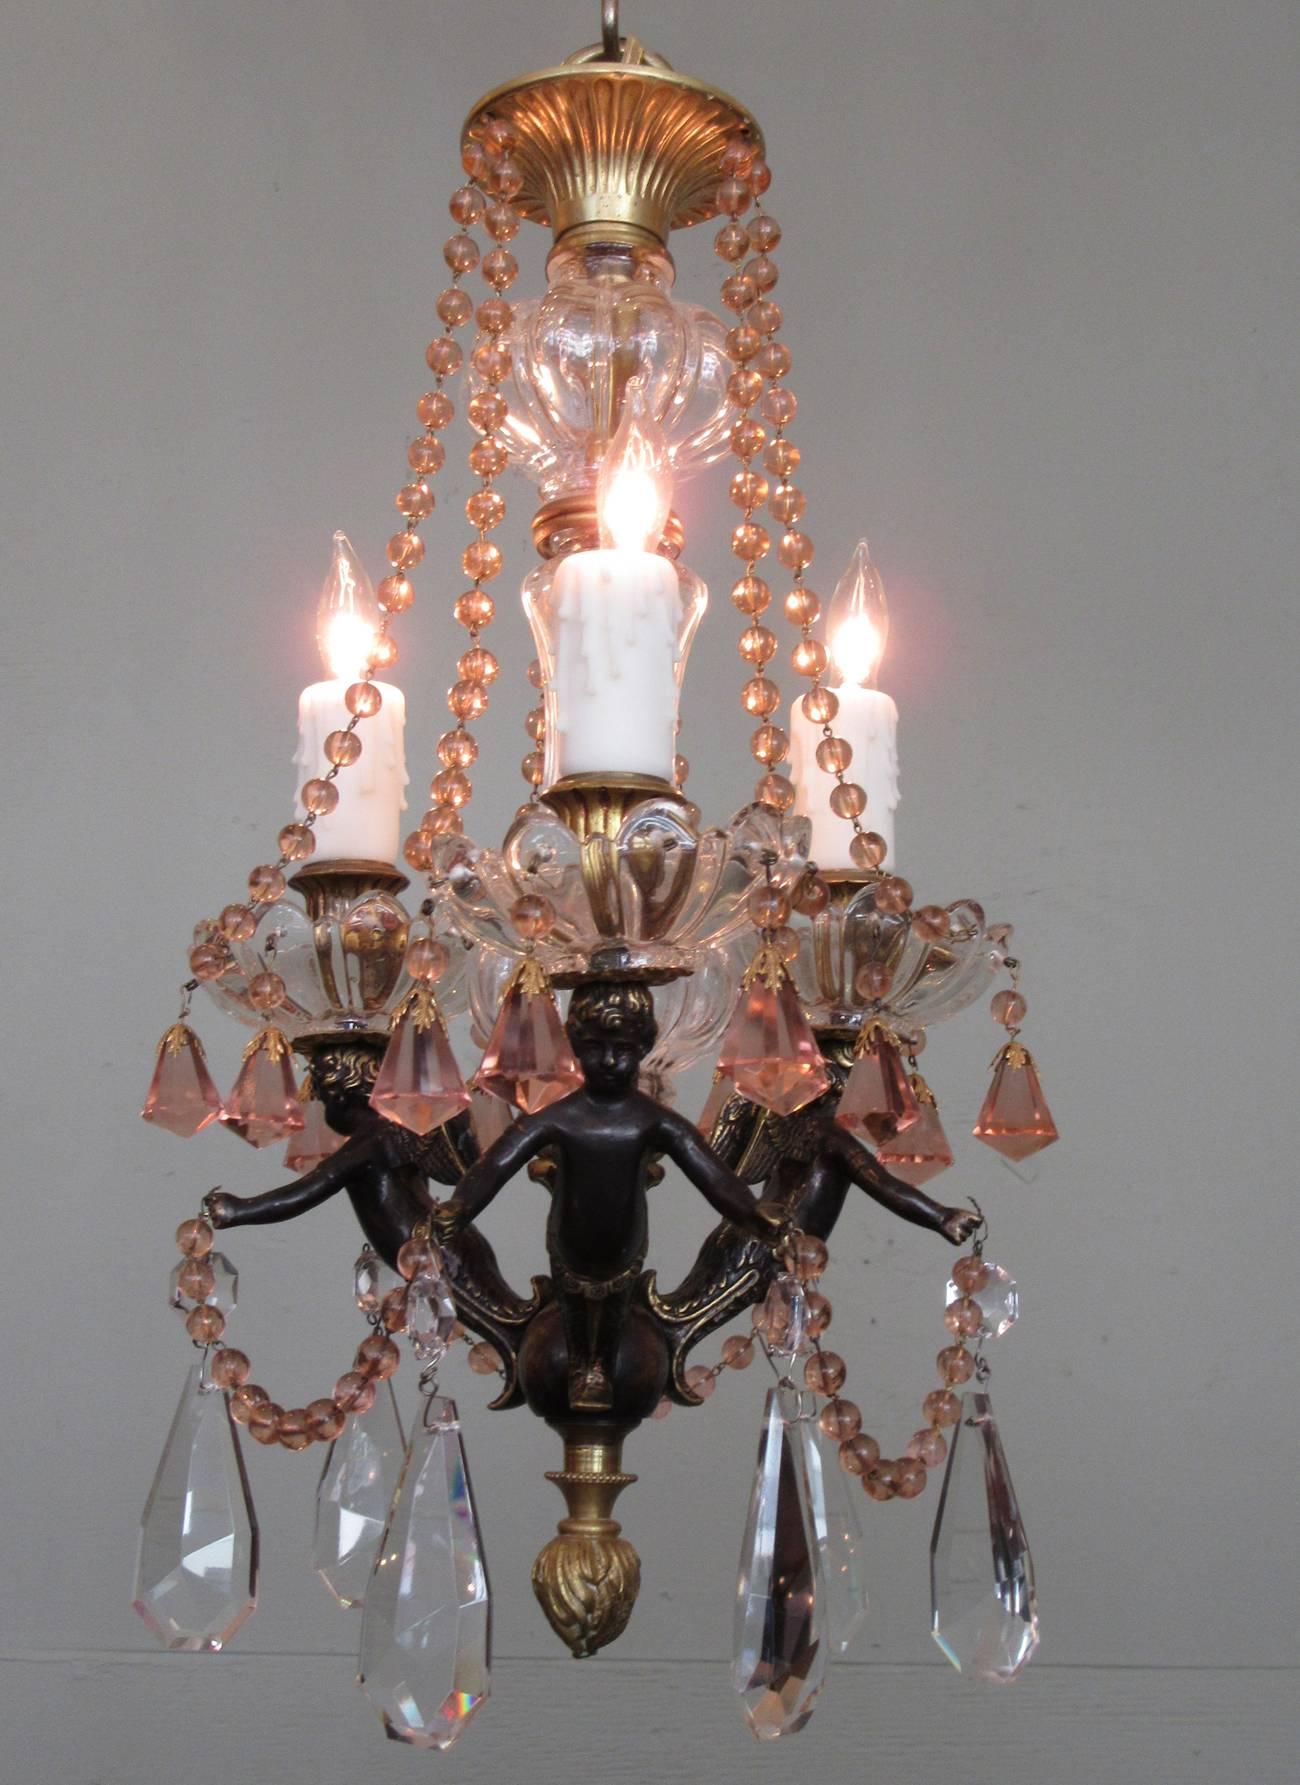 A small-scale early 20th century French Empire patinated bronze chandelier, circa 1910, featuring three candle arms adorned with putti, peach swag and crystals and clear cut crystal pendants. The chandelier has recently been cleaned and rewired with